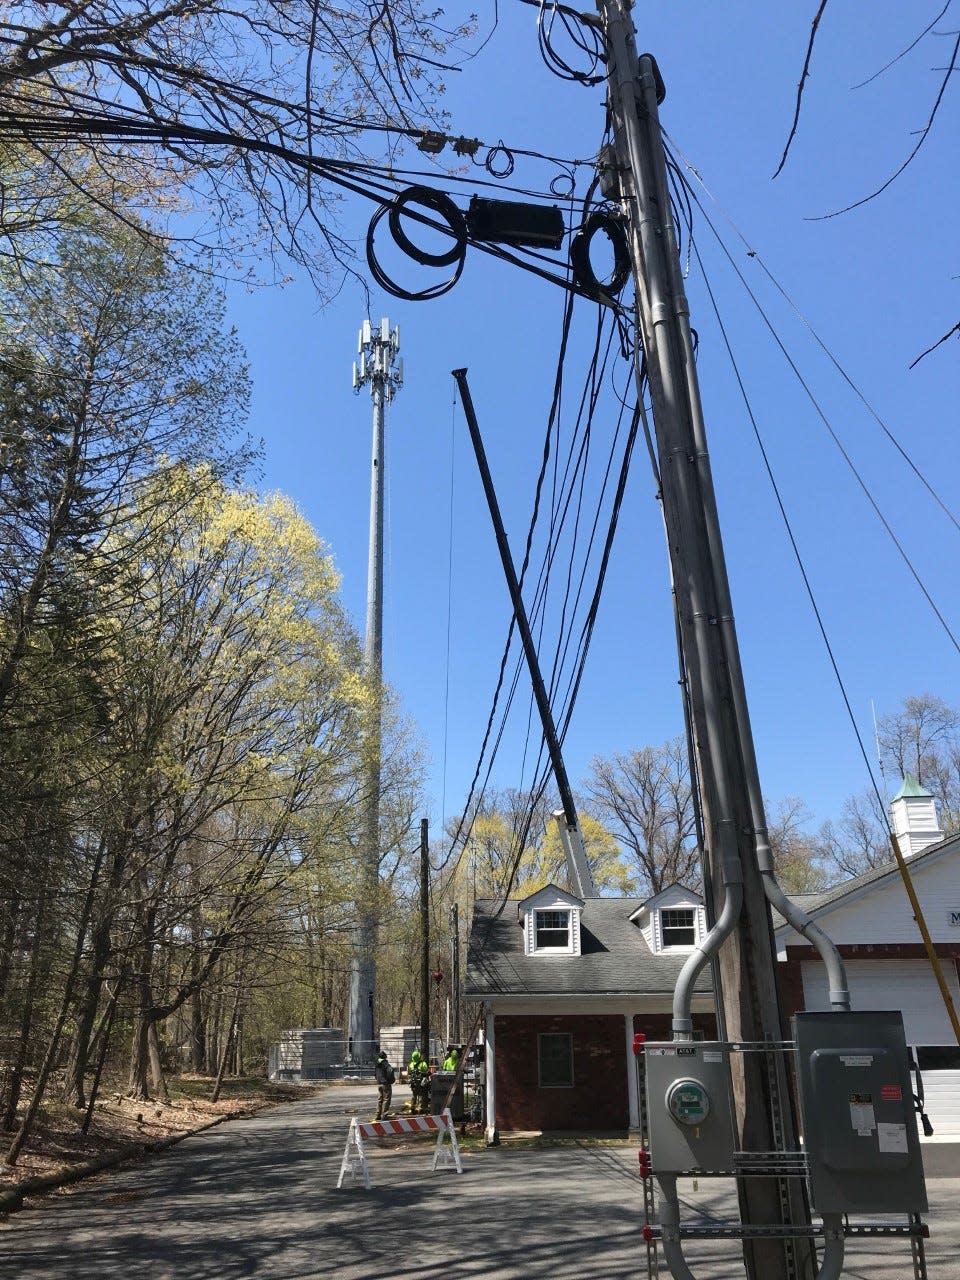 A temporary cell tower was erected on the Fire Company 3 property in May 2021.